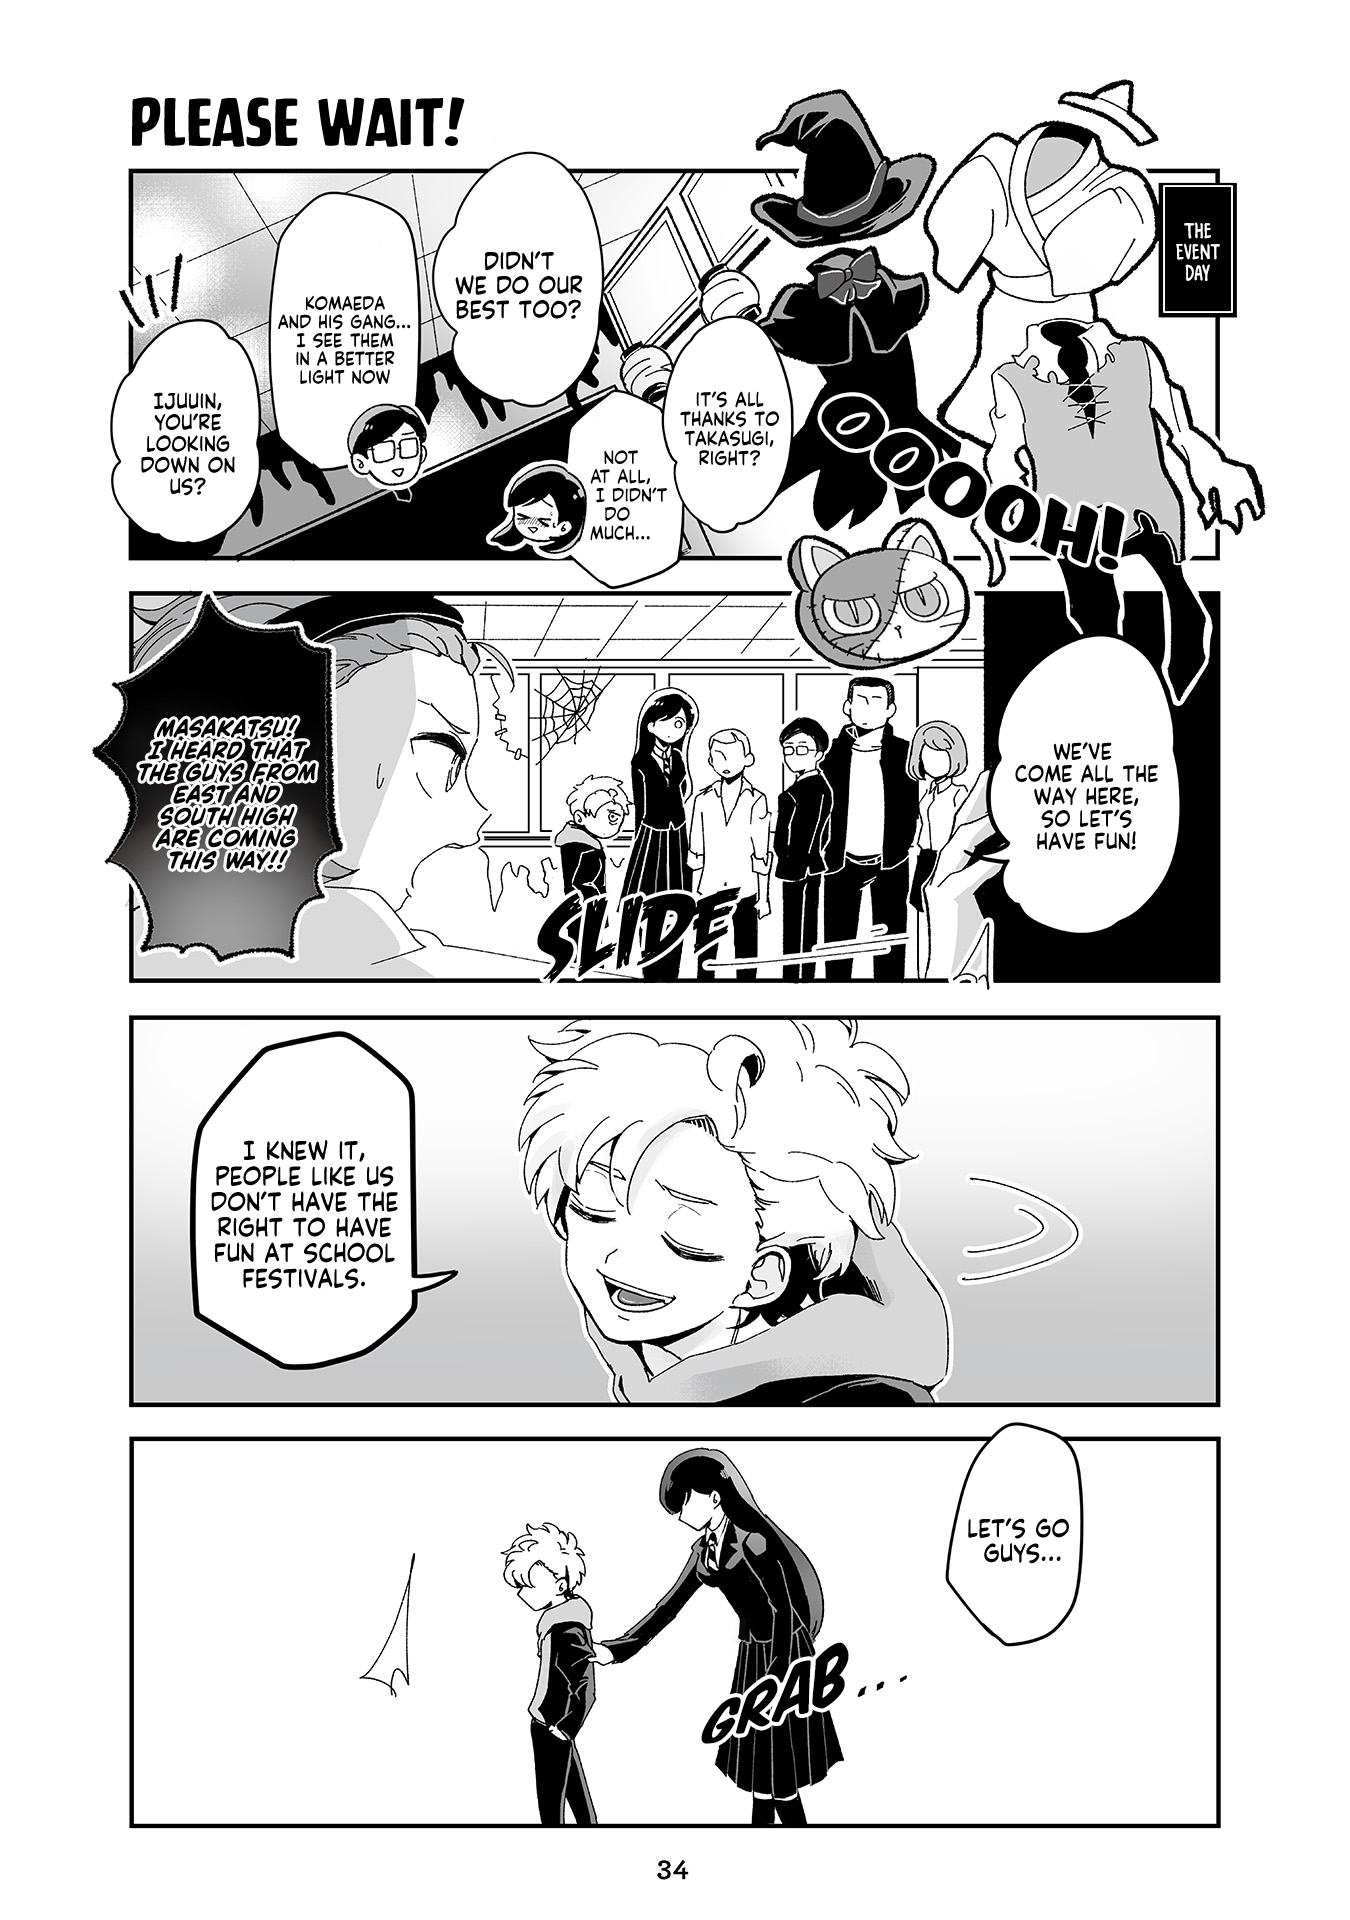 Takasugi’S Tiny Delinquent Hero - Page 2